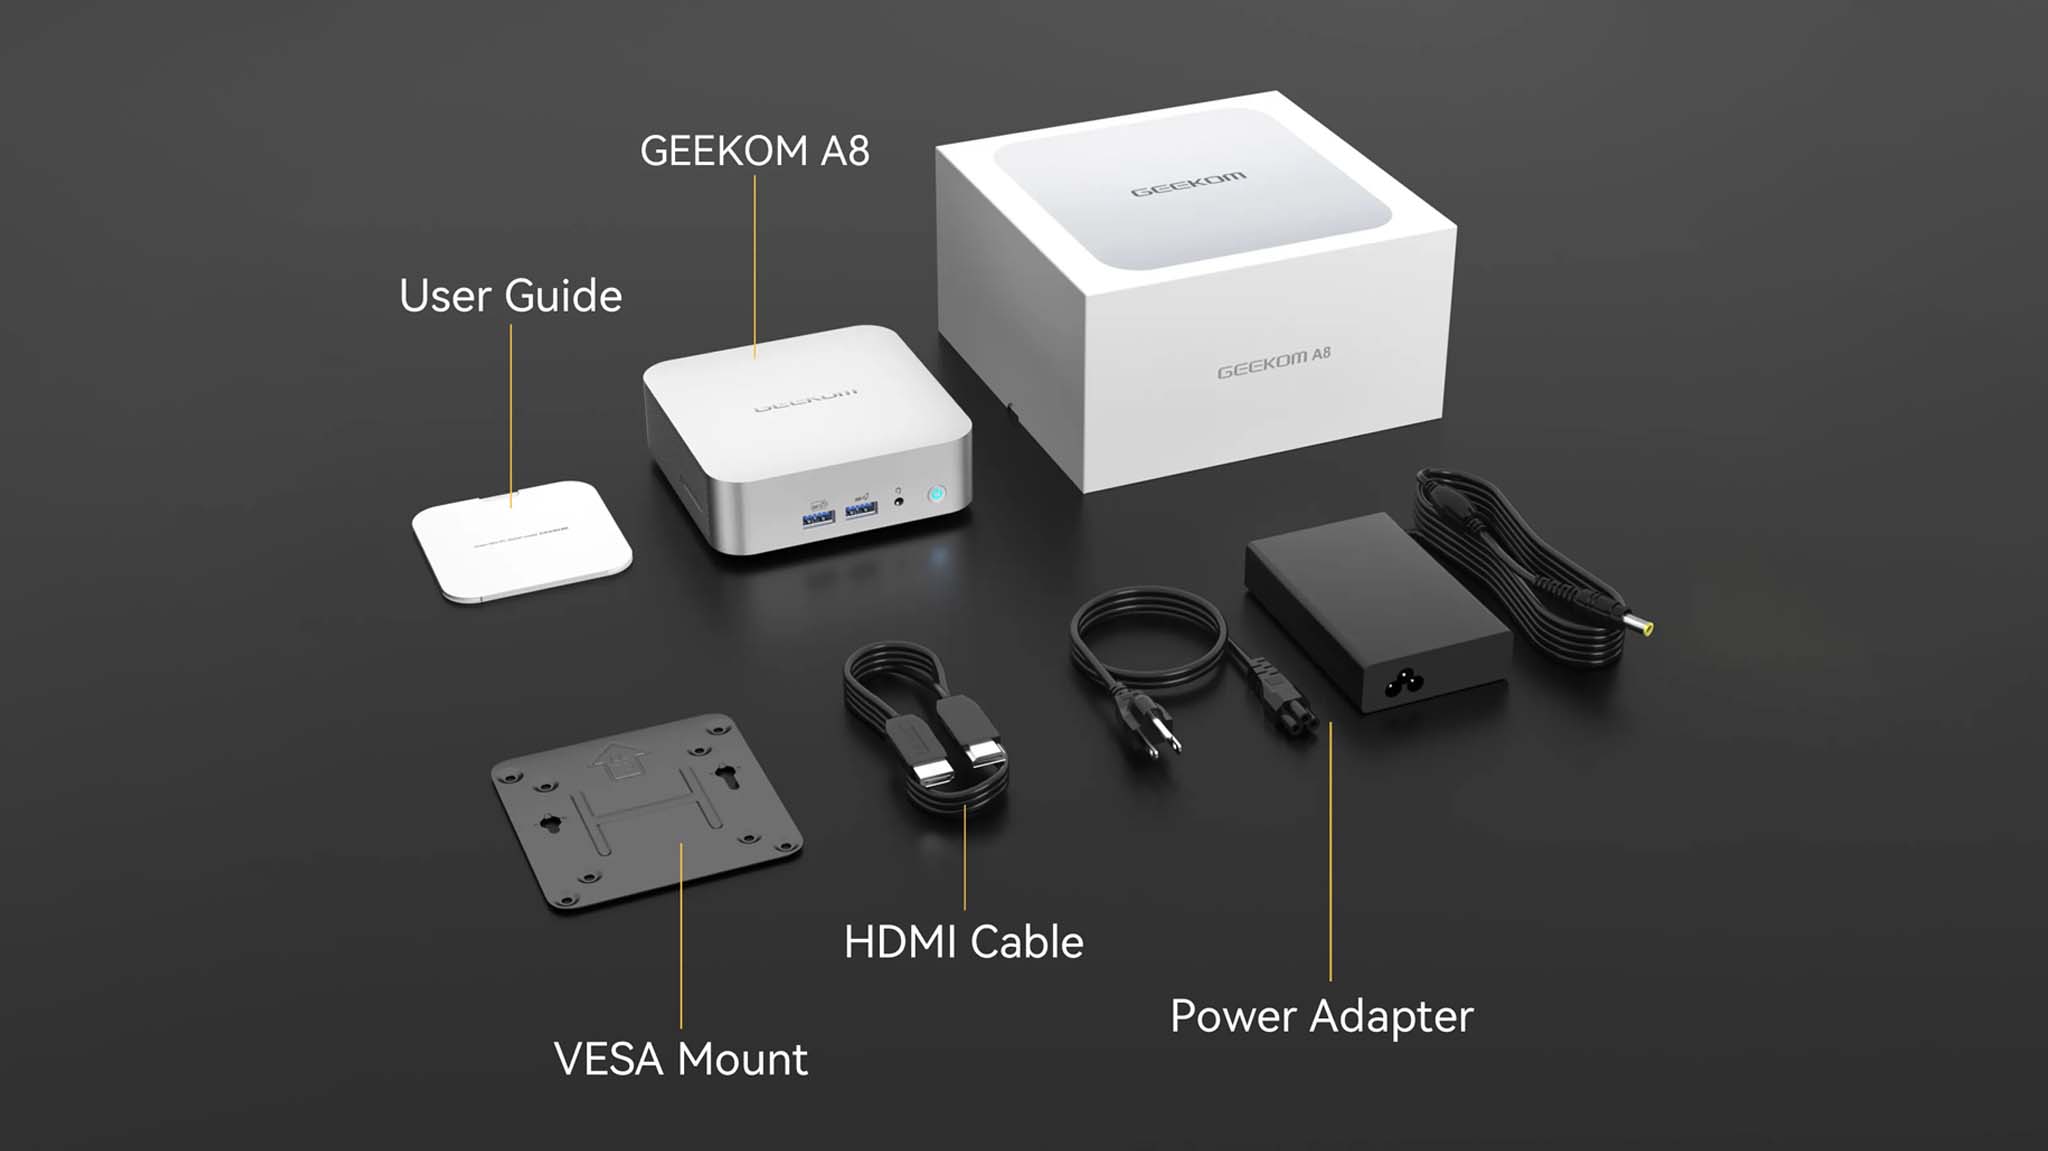 Geekom A8: What's in the box?